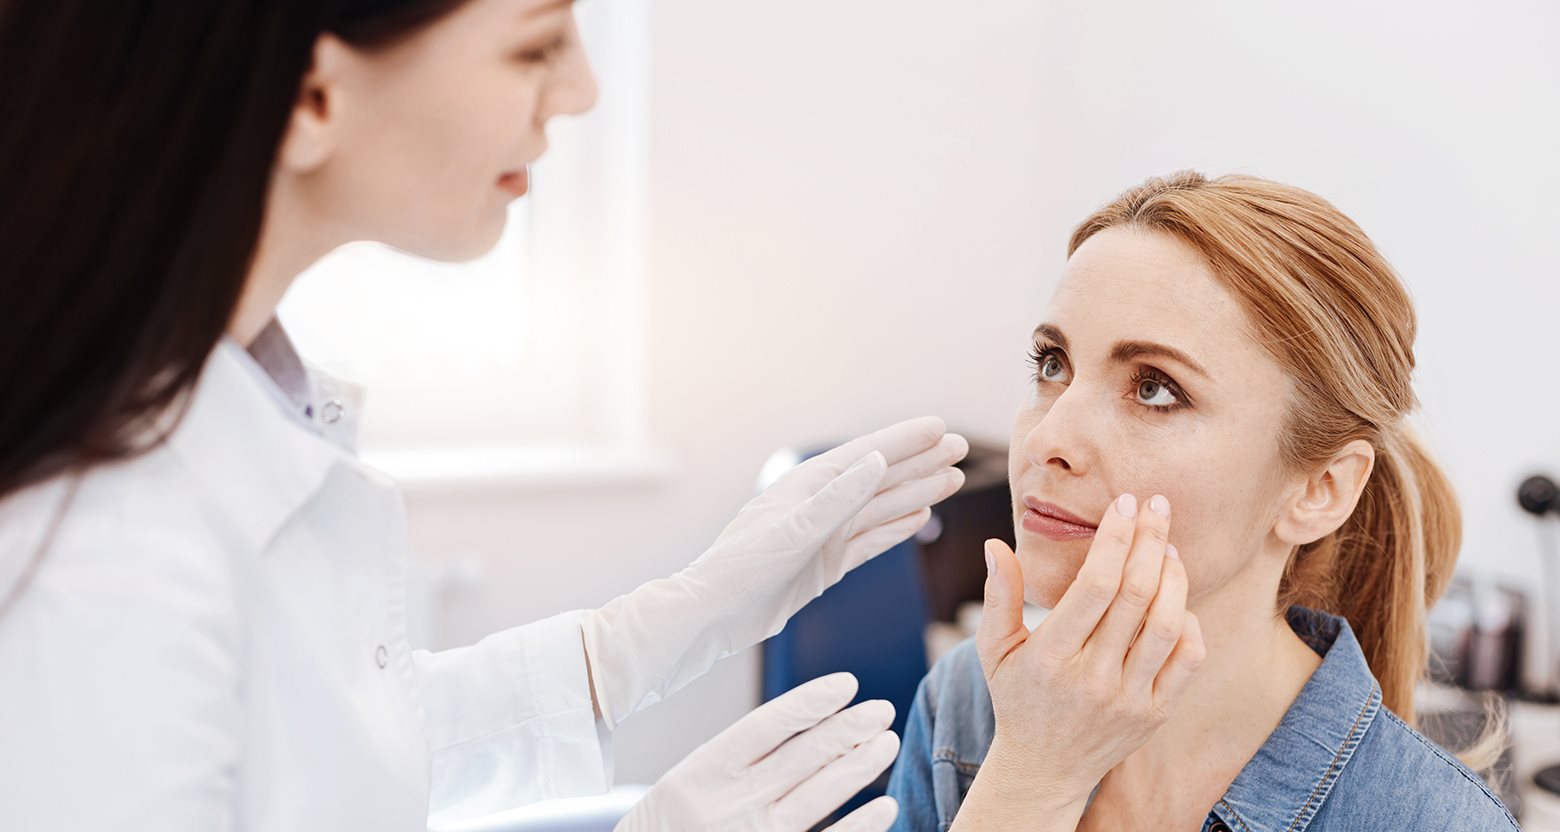 woman speaking to a doctor about acne